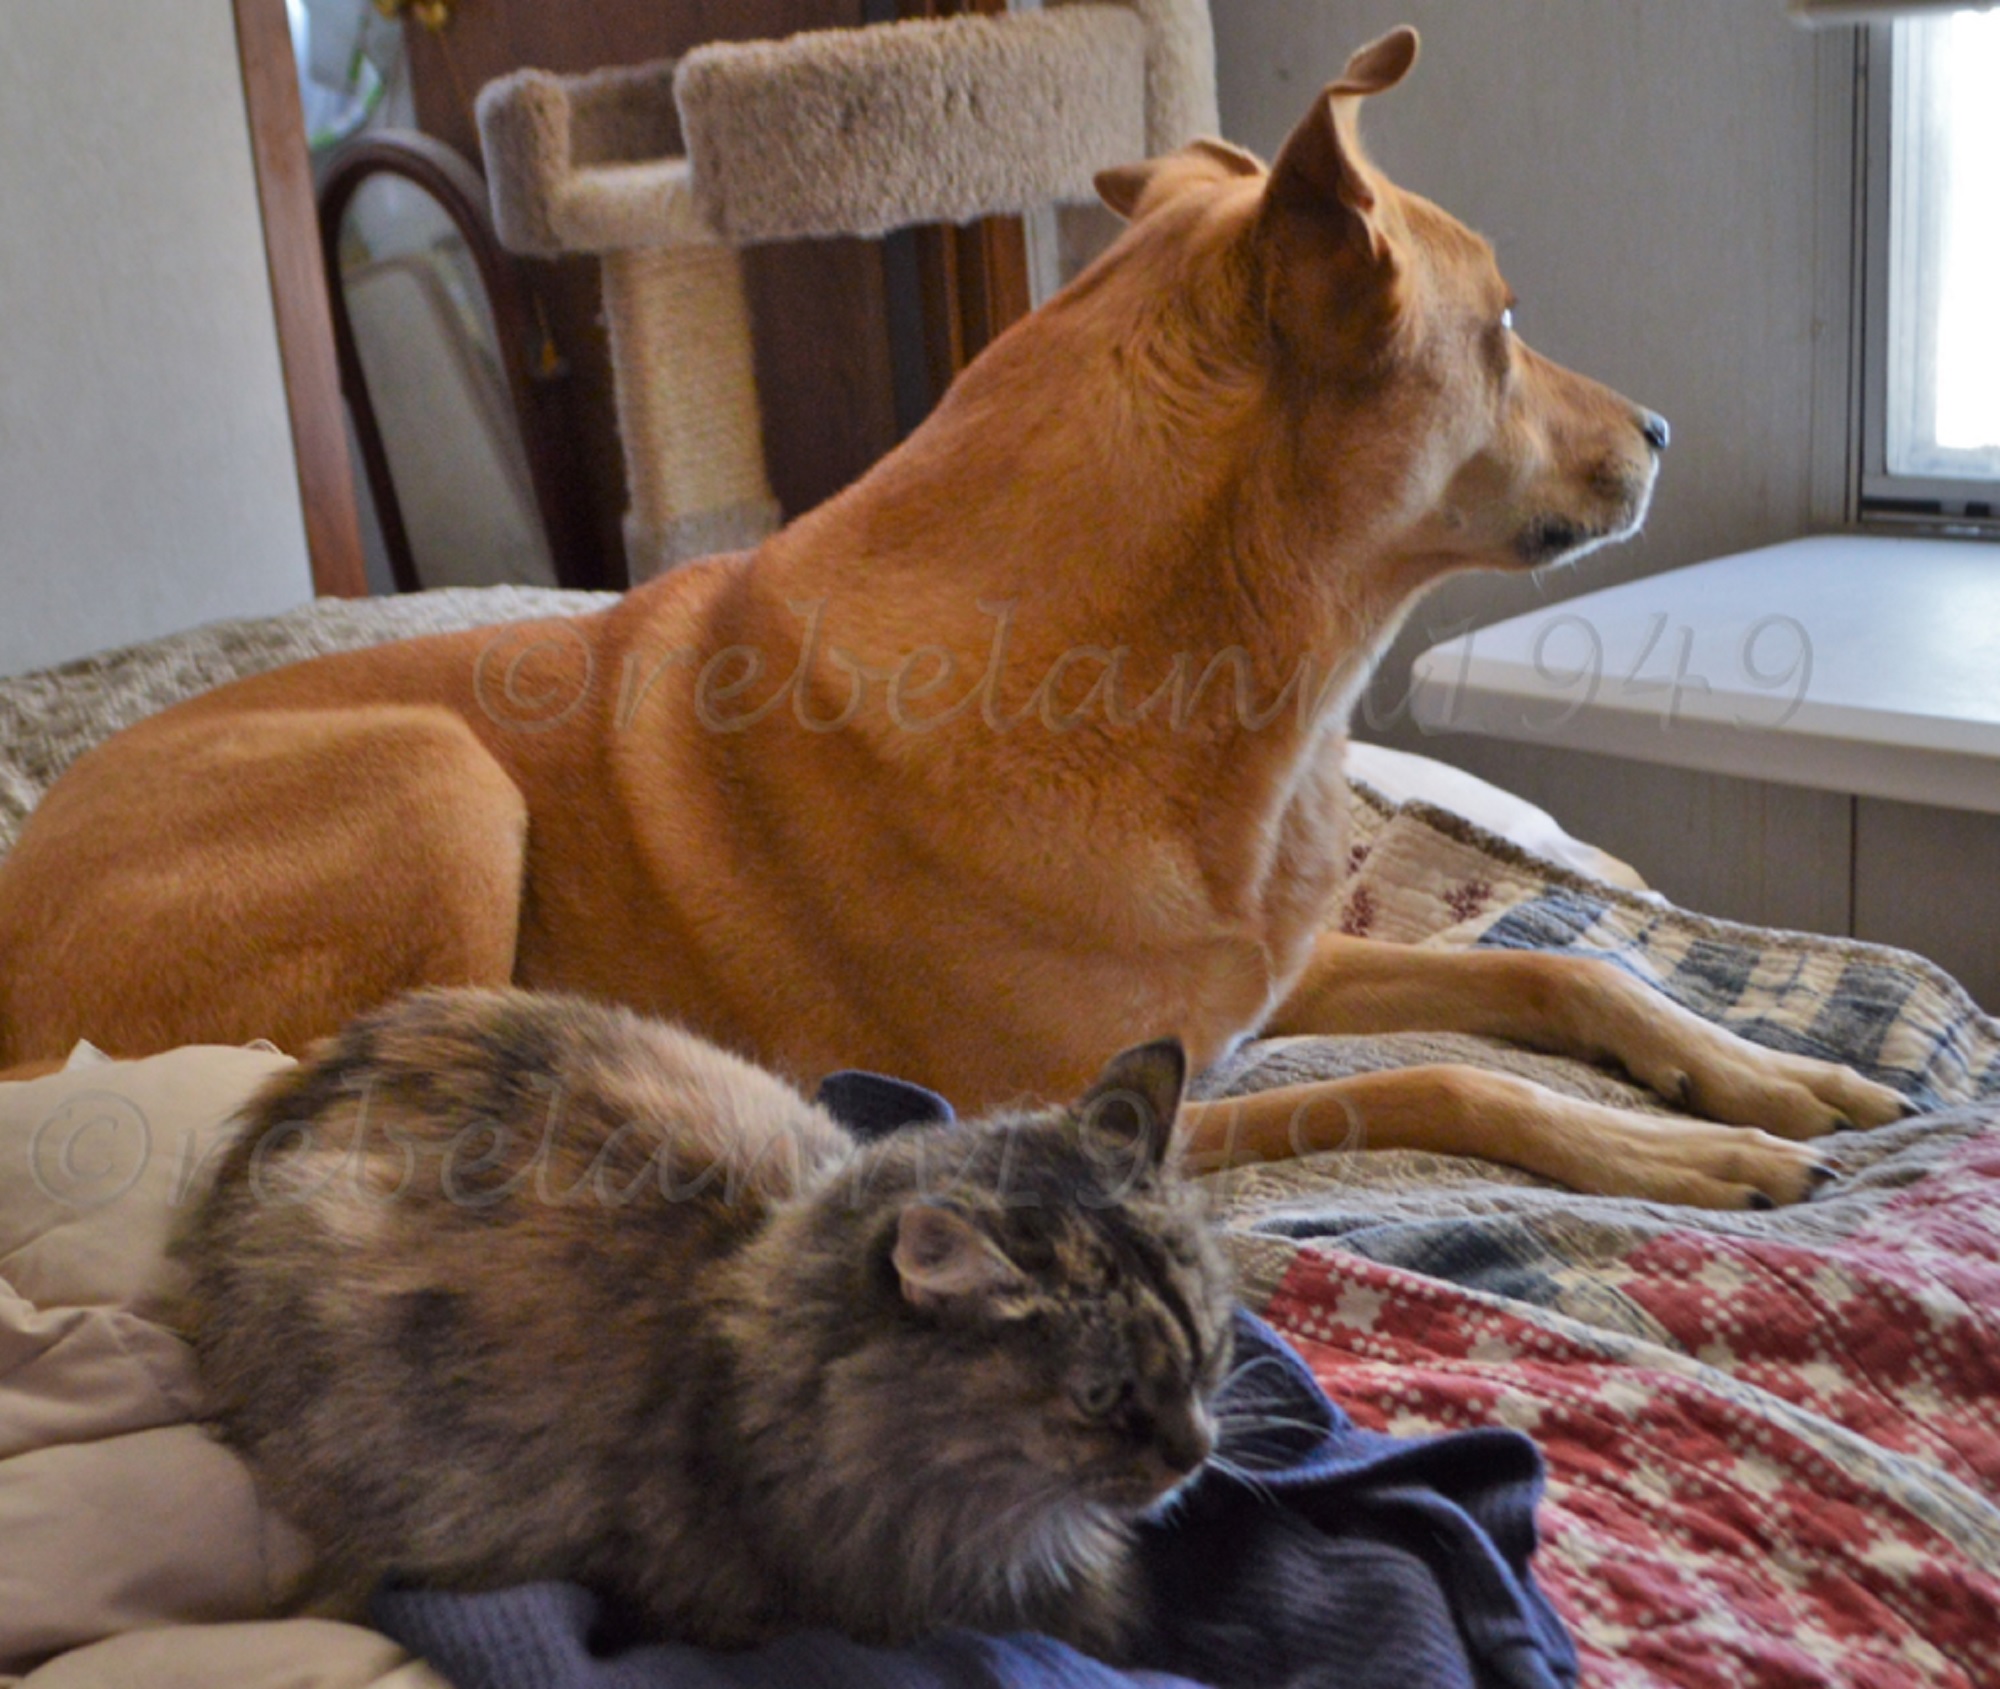 Ally watches out the window while Boobear keeps warm beside her. I took this shot a couple years ago.